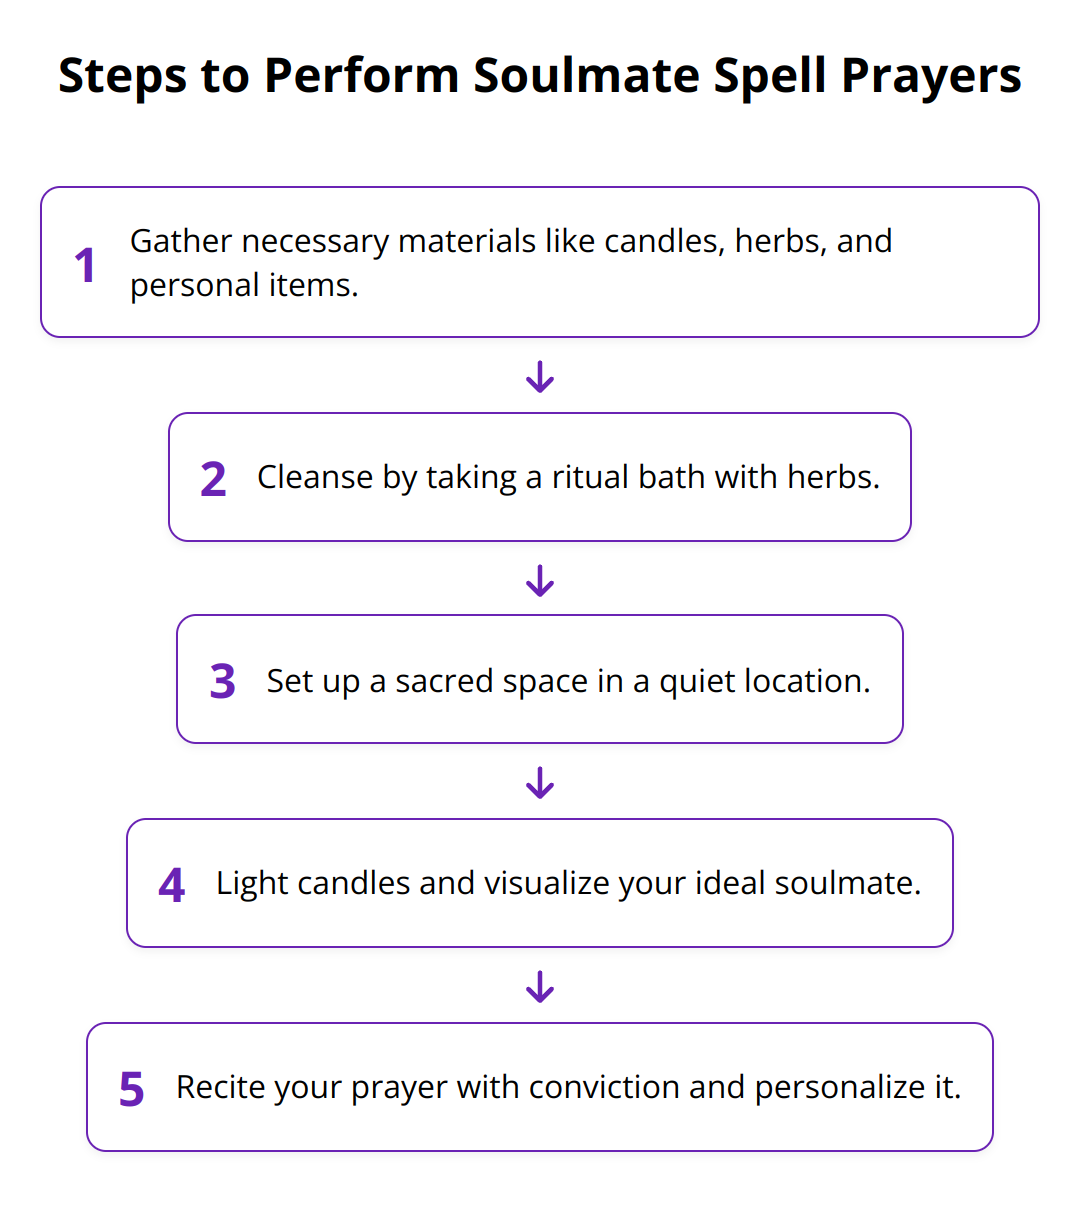 Flow Chart - Steps to Perform Soulmate Spell Prayers